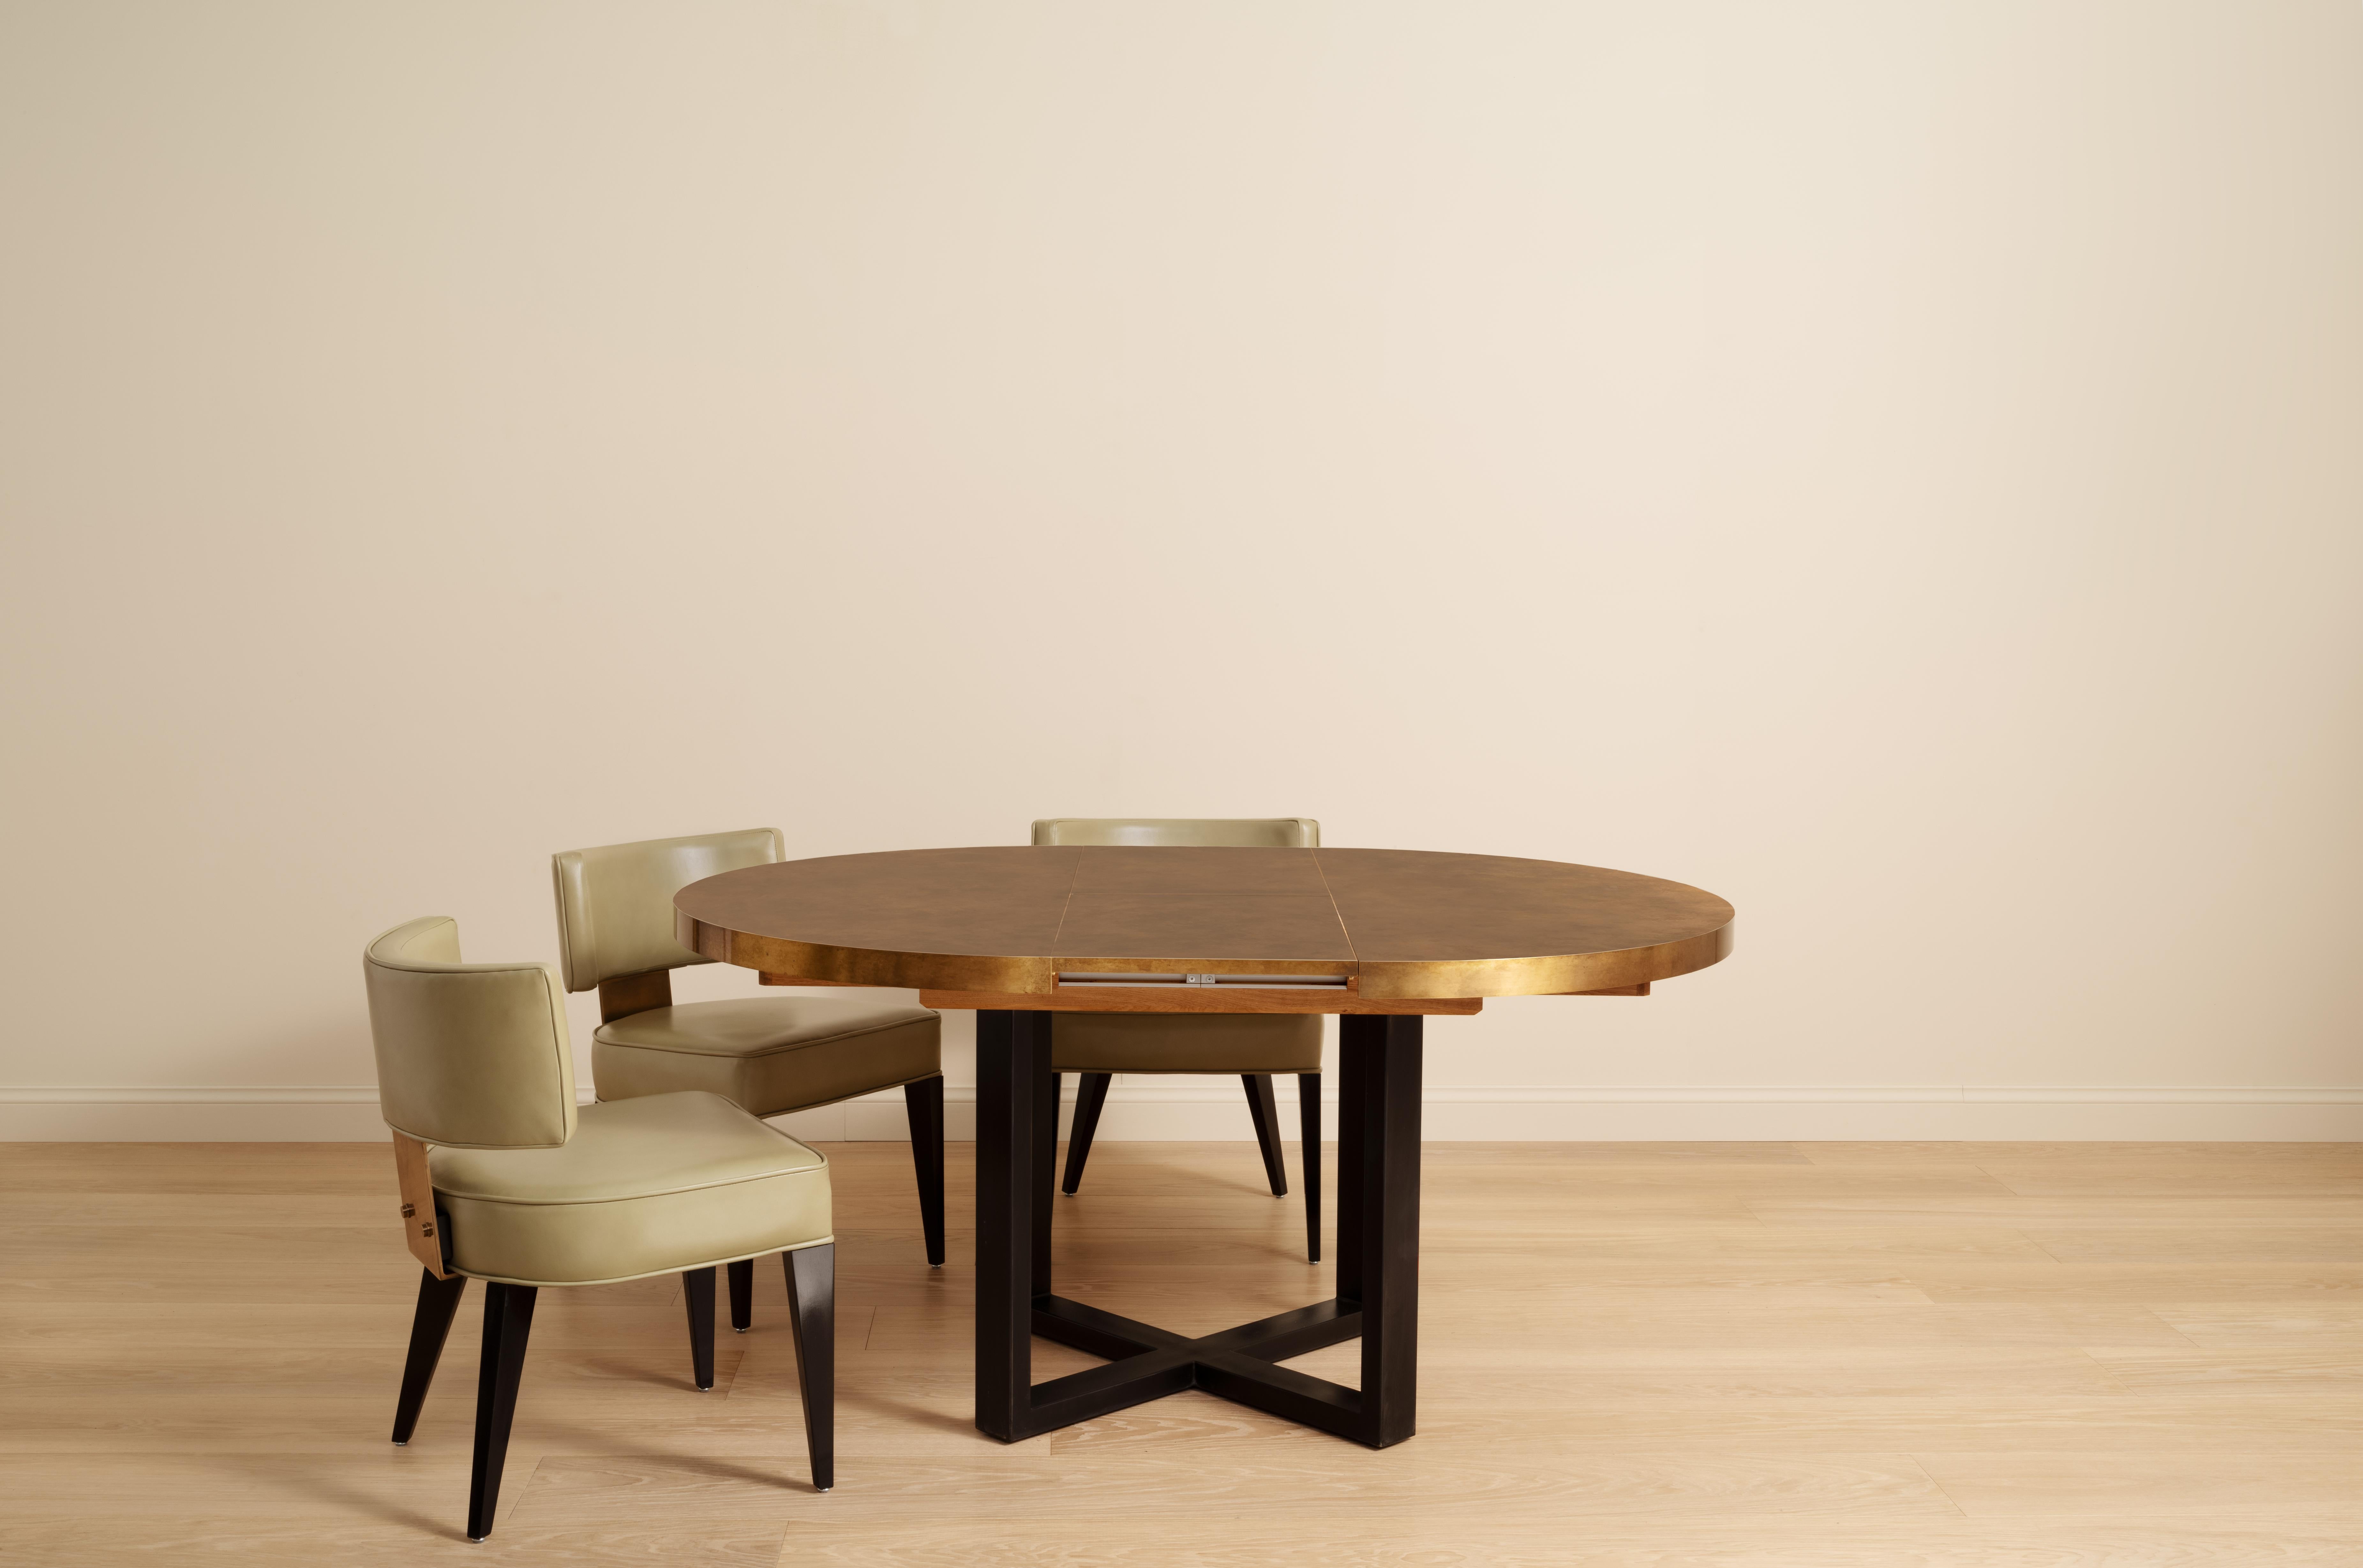 The Orlando Extending Brass Dining Table features a brass wrapped table top with a 'x' frame steel base, available in a powder-coated or blackened steel finish. 

Created to accommodate different and diverse spaces, the Orlando stores a folding leaf